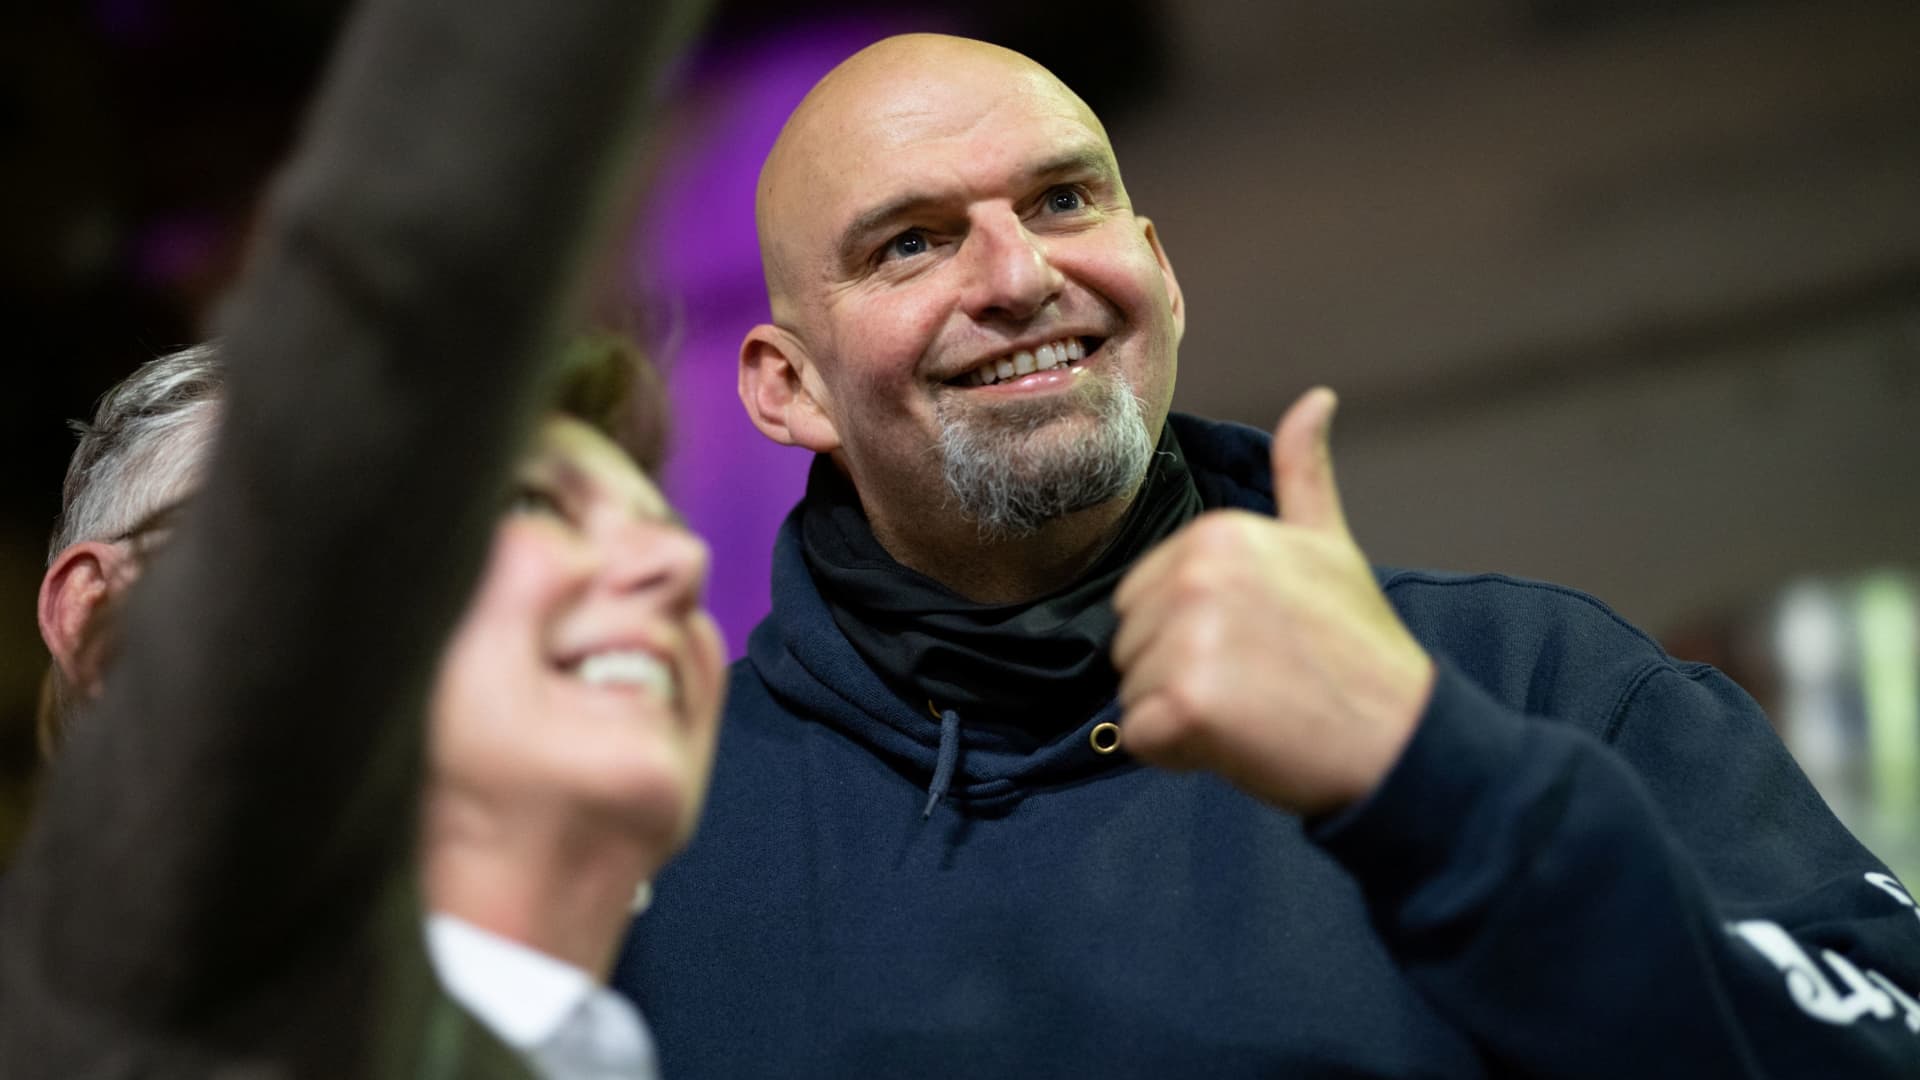 Lt. Gov. John Fetterman, U.S. Democratic Senate candidate for Pennsylvania, takes a selfie with attendees at a meet-and-greet at the Weyerbacher Brewing Company in Easton, Pennsylvania, May 1, 2022.